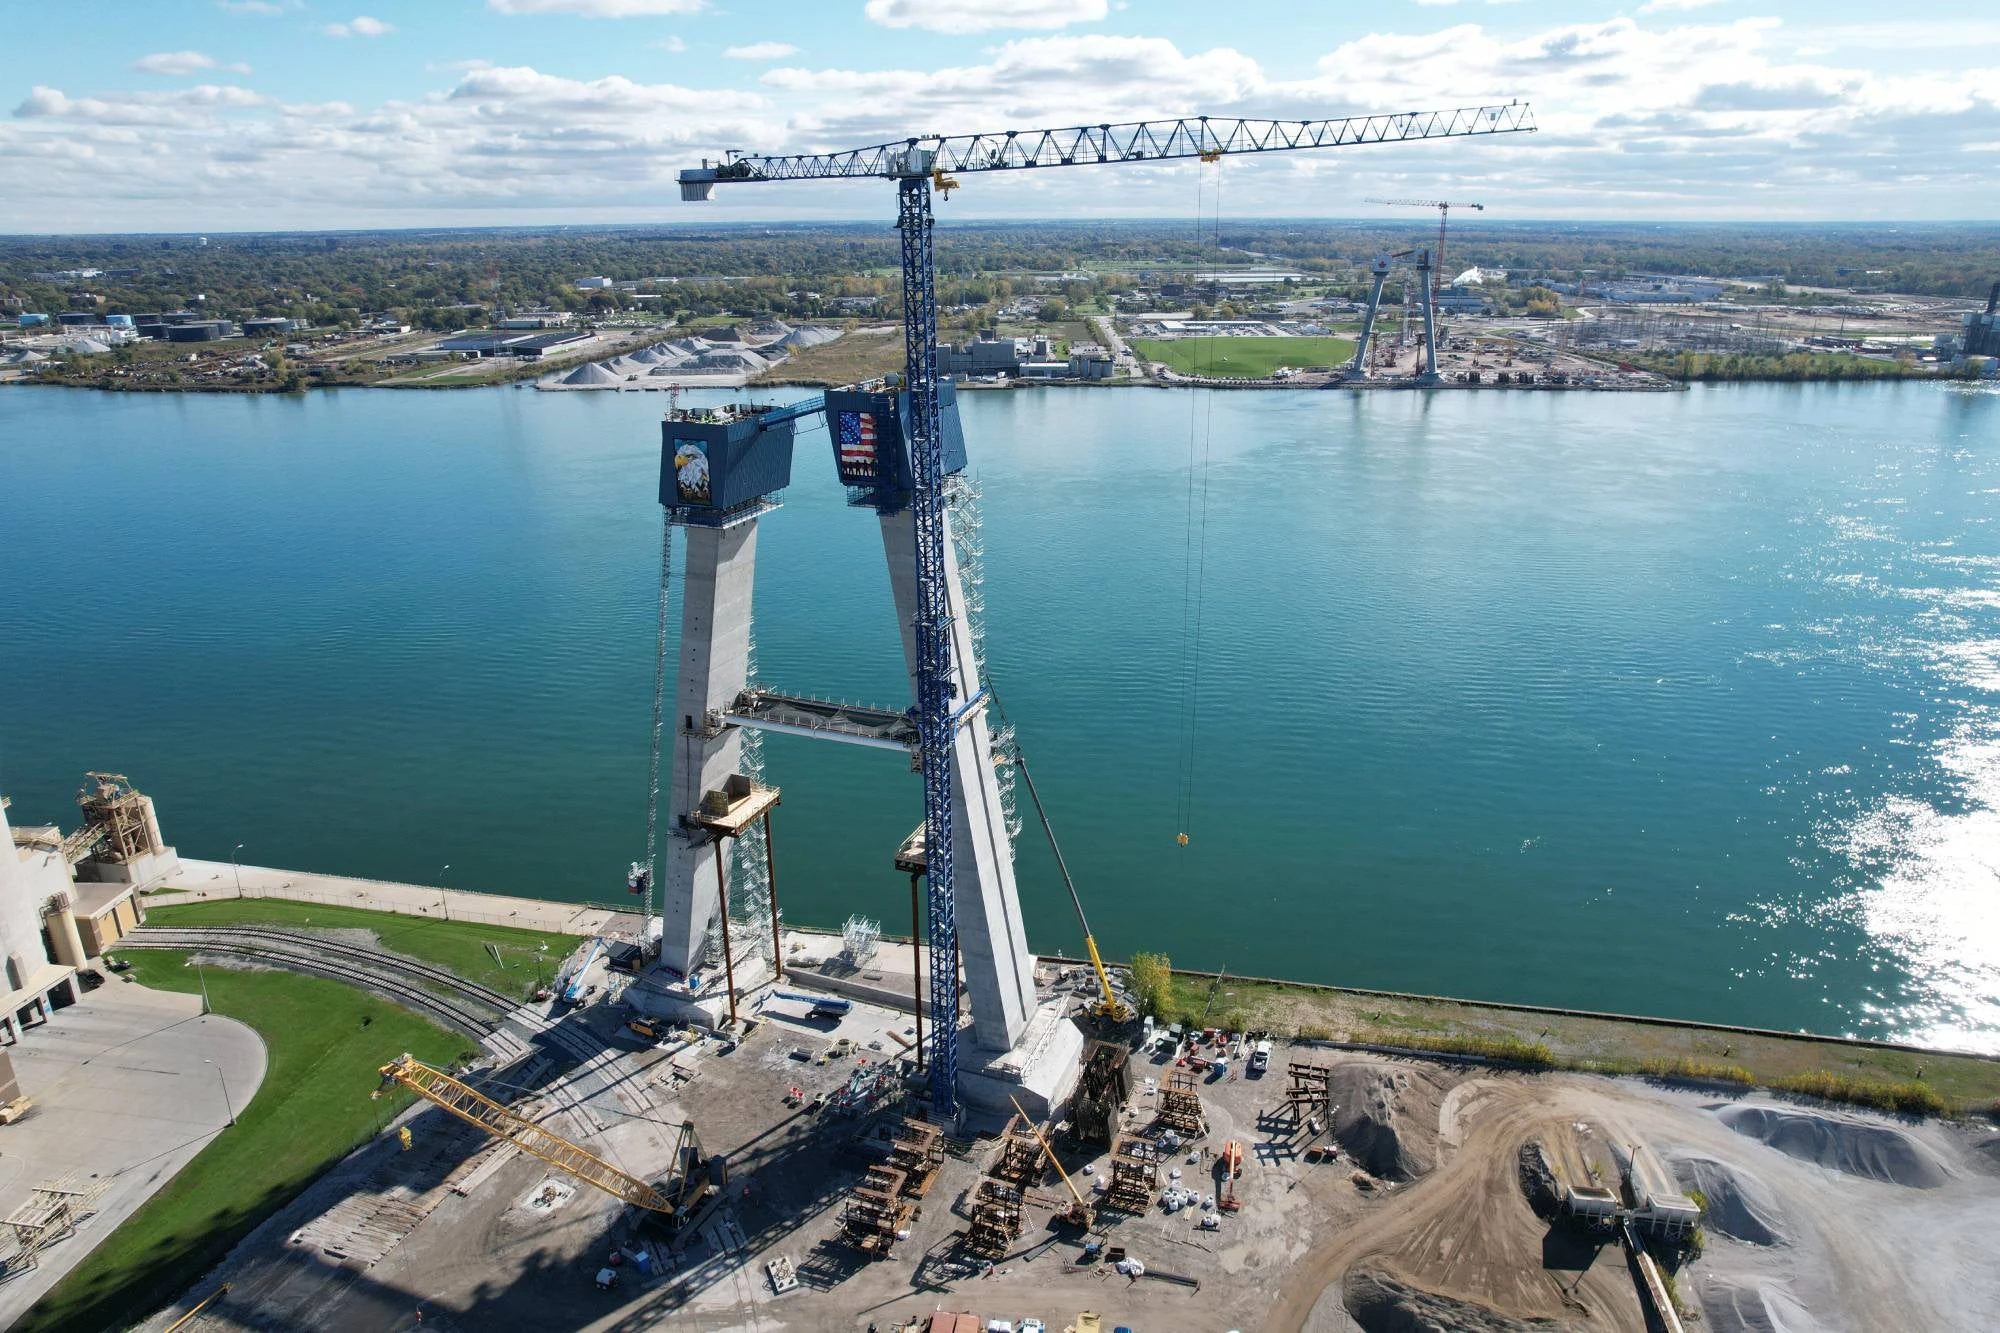 Forging partnerships and conducting economic analyses can help move cross-border PPPs forward | Image: Gordie Howe International Bridge project